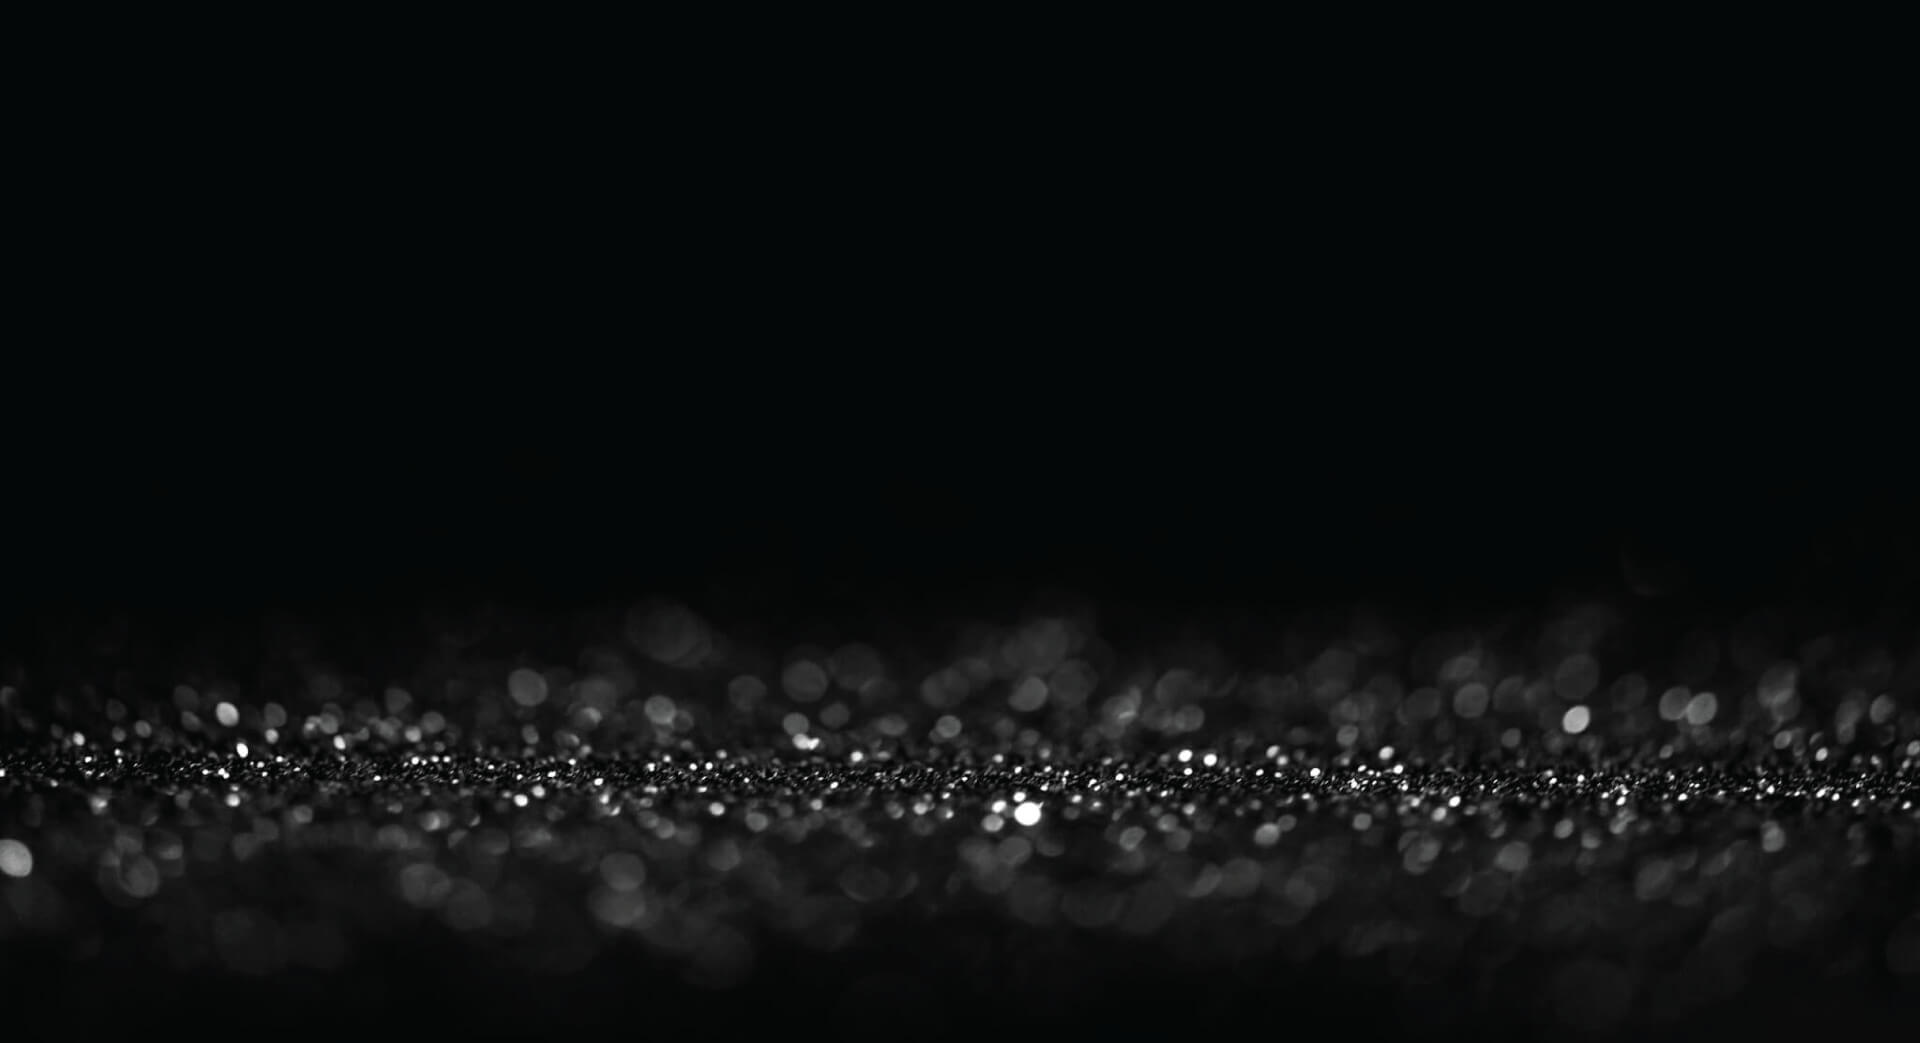 A black background graphic featuring clusters of silver speckles of confetti.